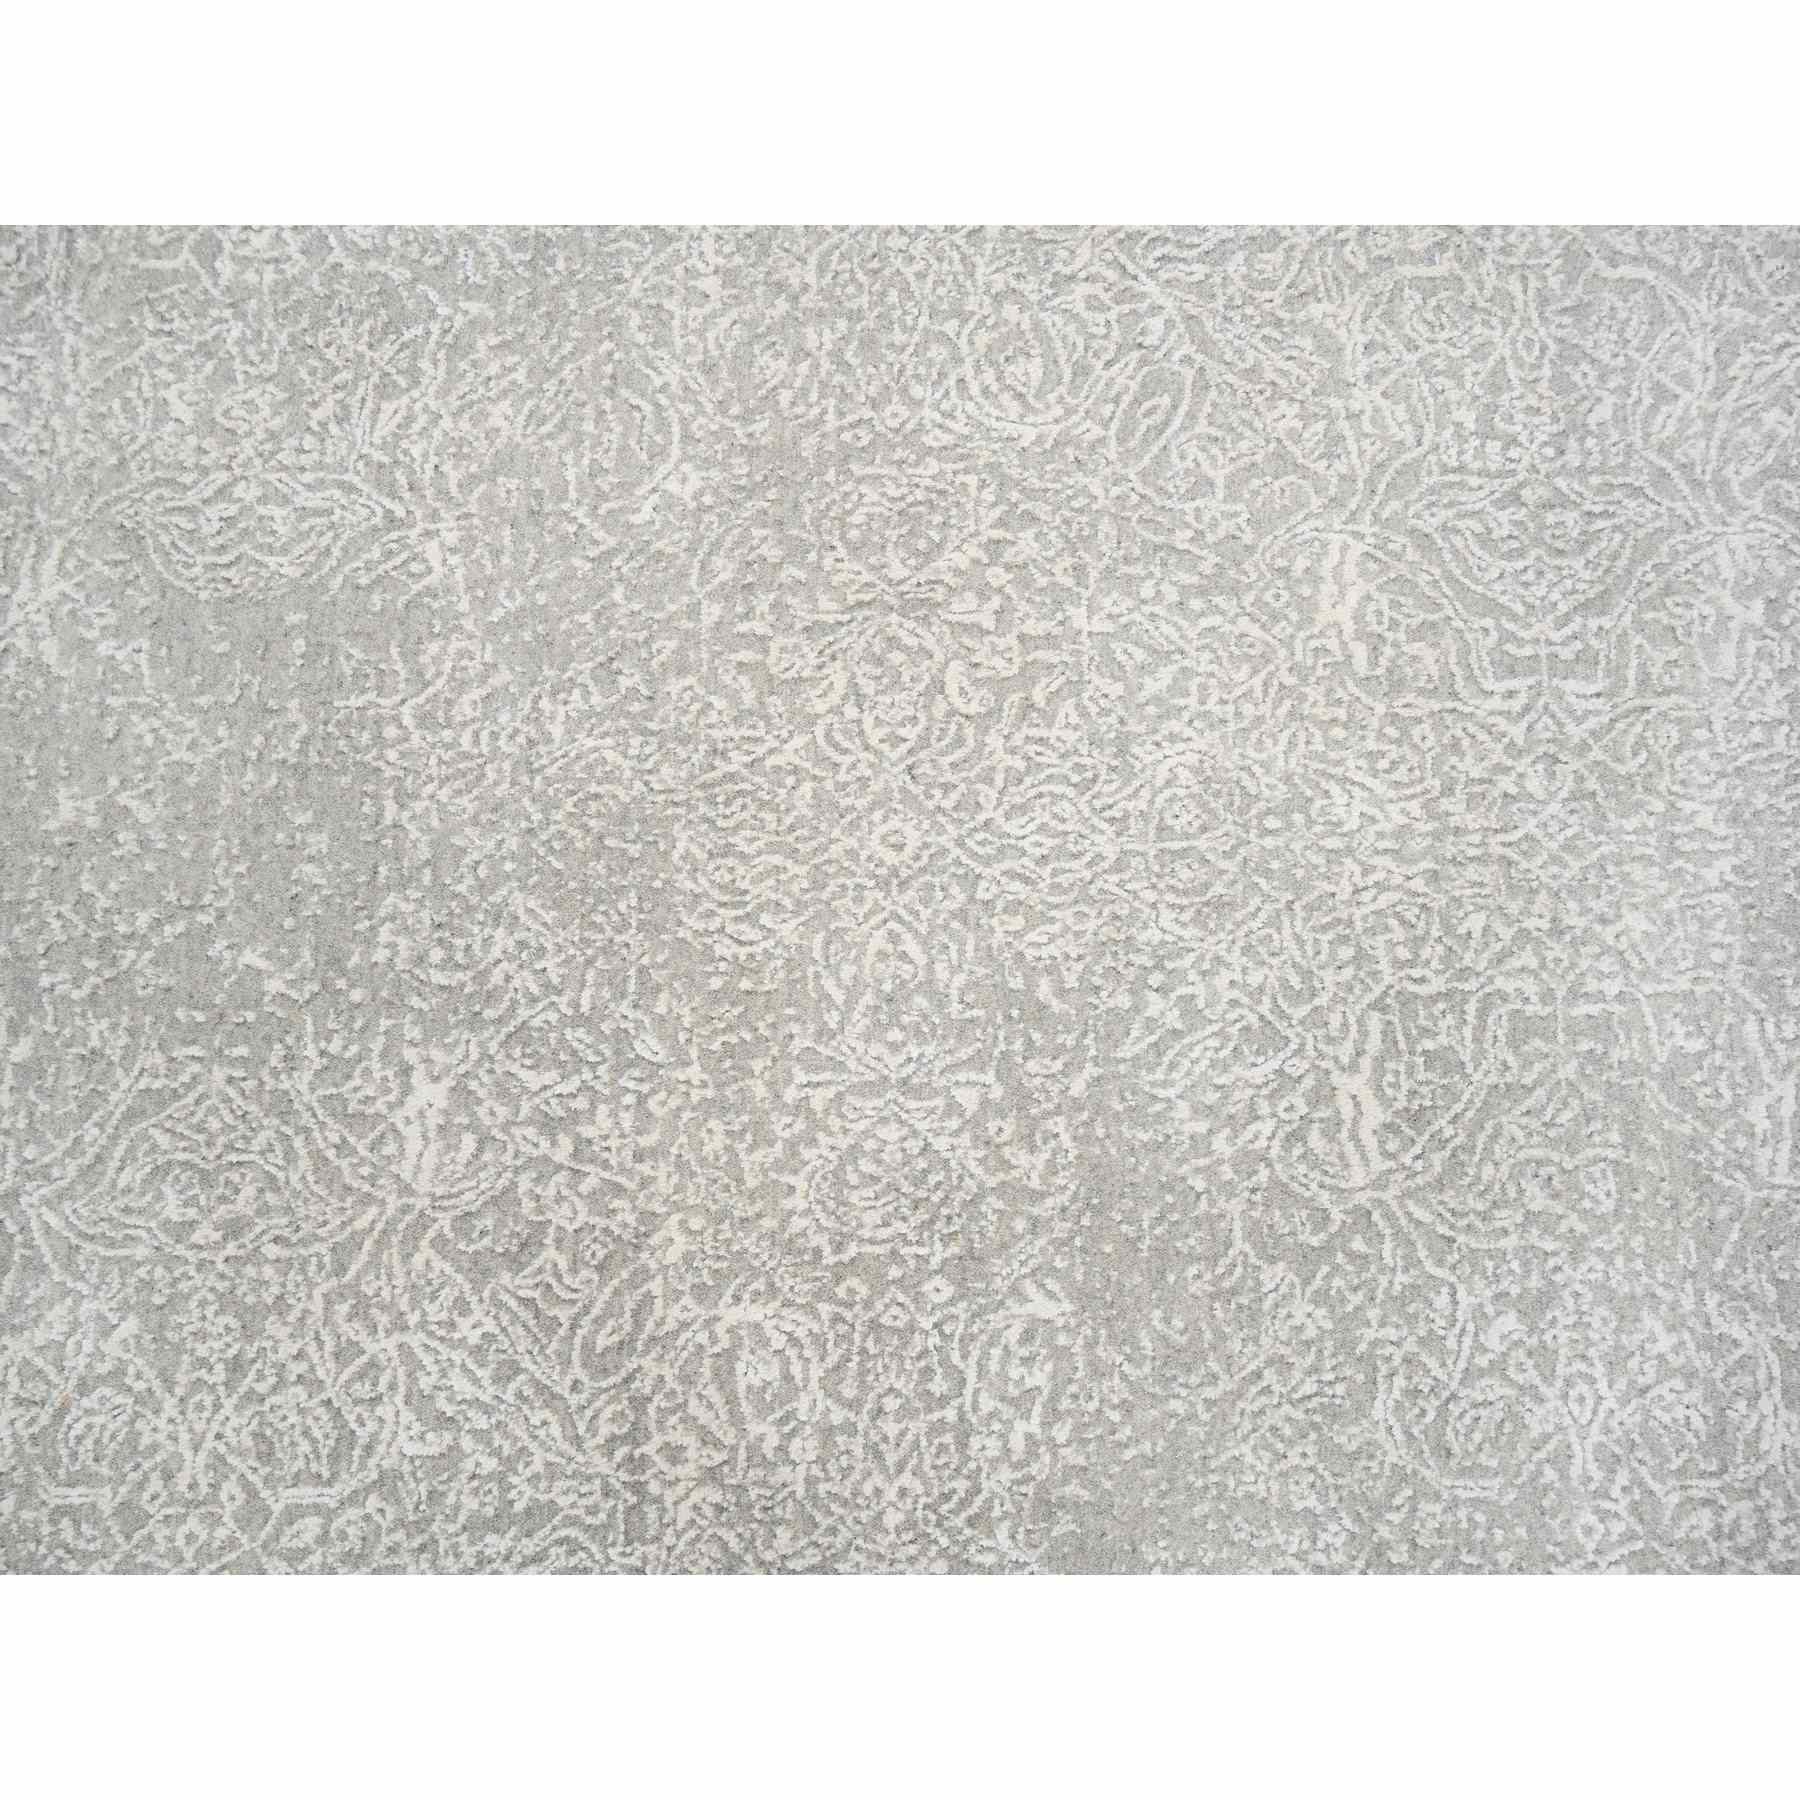 Modern-and-Contemporary-Hand-Loomed-Rug-316335